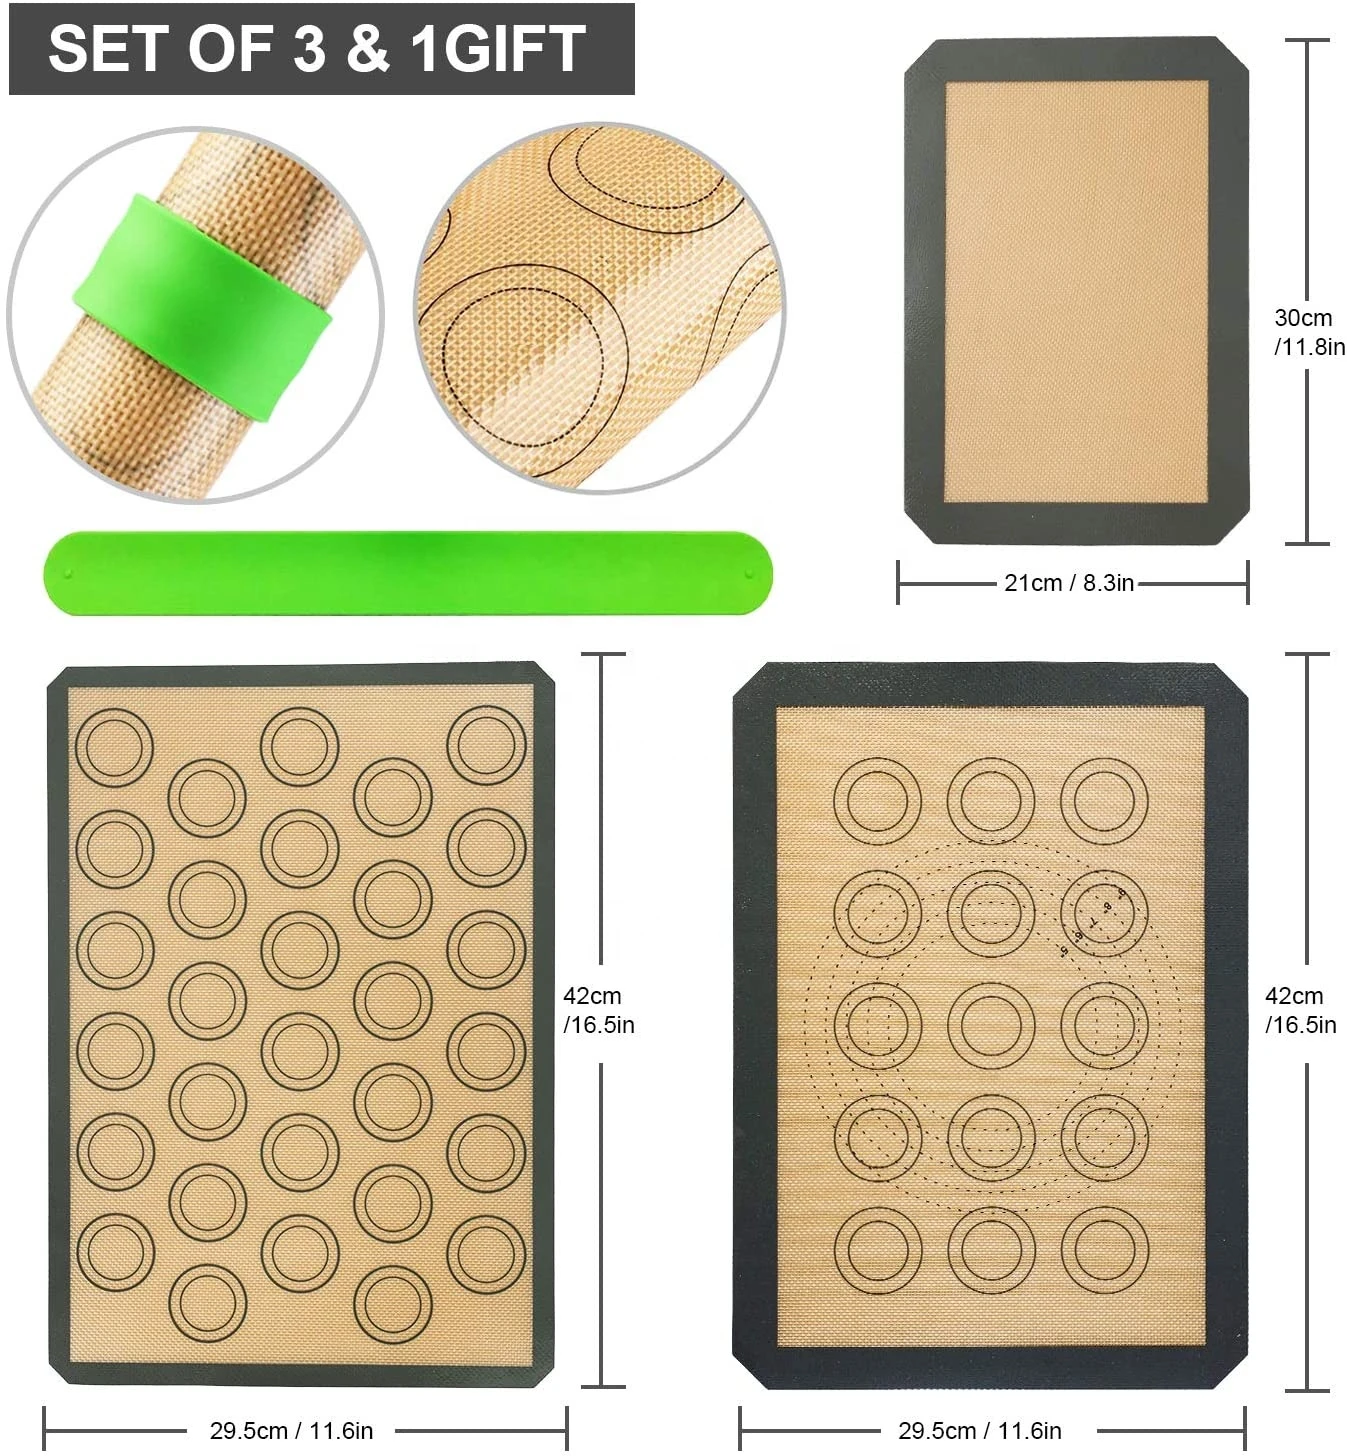 Easy Clean-Up Oven-Safe Food-Grade Nonstick Silicone Baking Mat Sheet